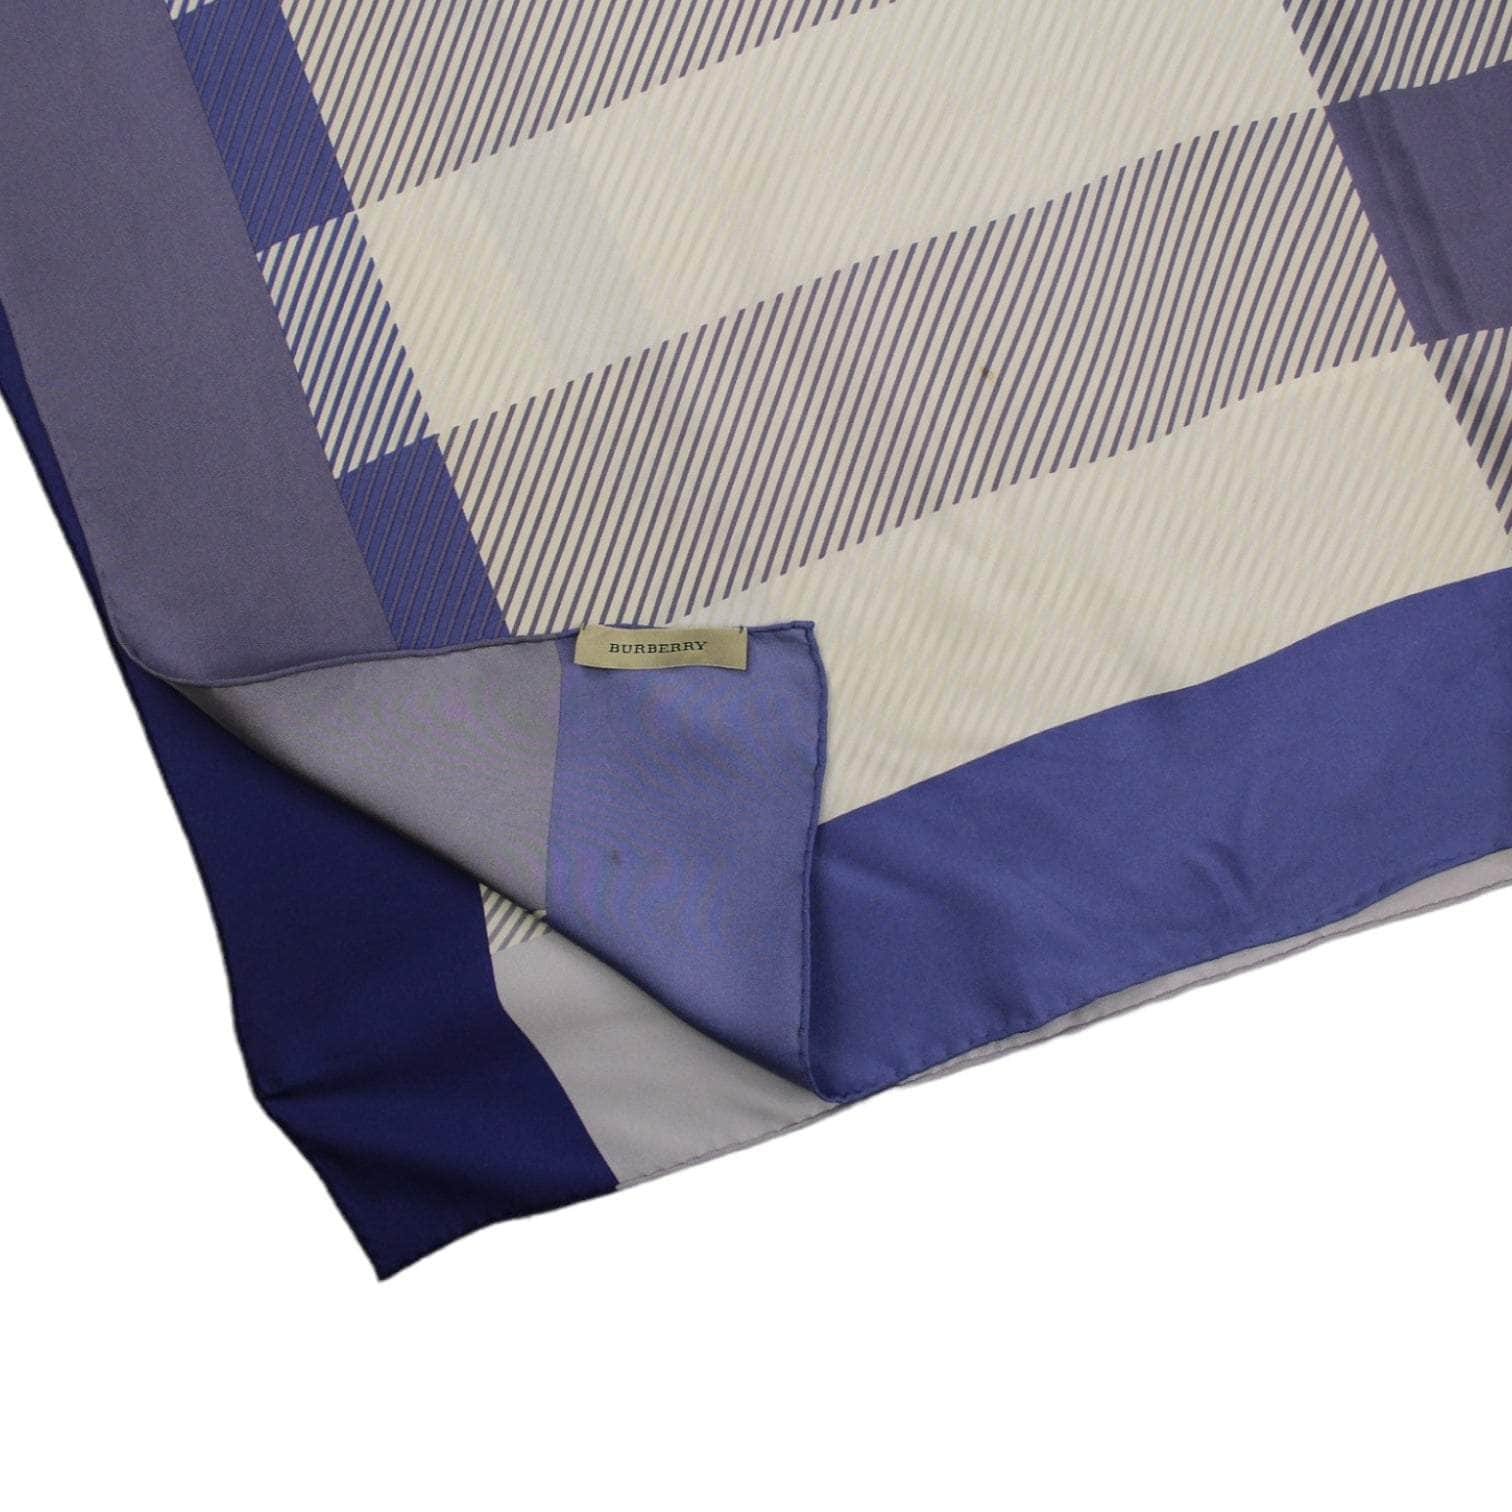 Vintage Burberry Blue Chequerboard Silk Scarf